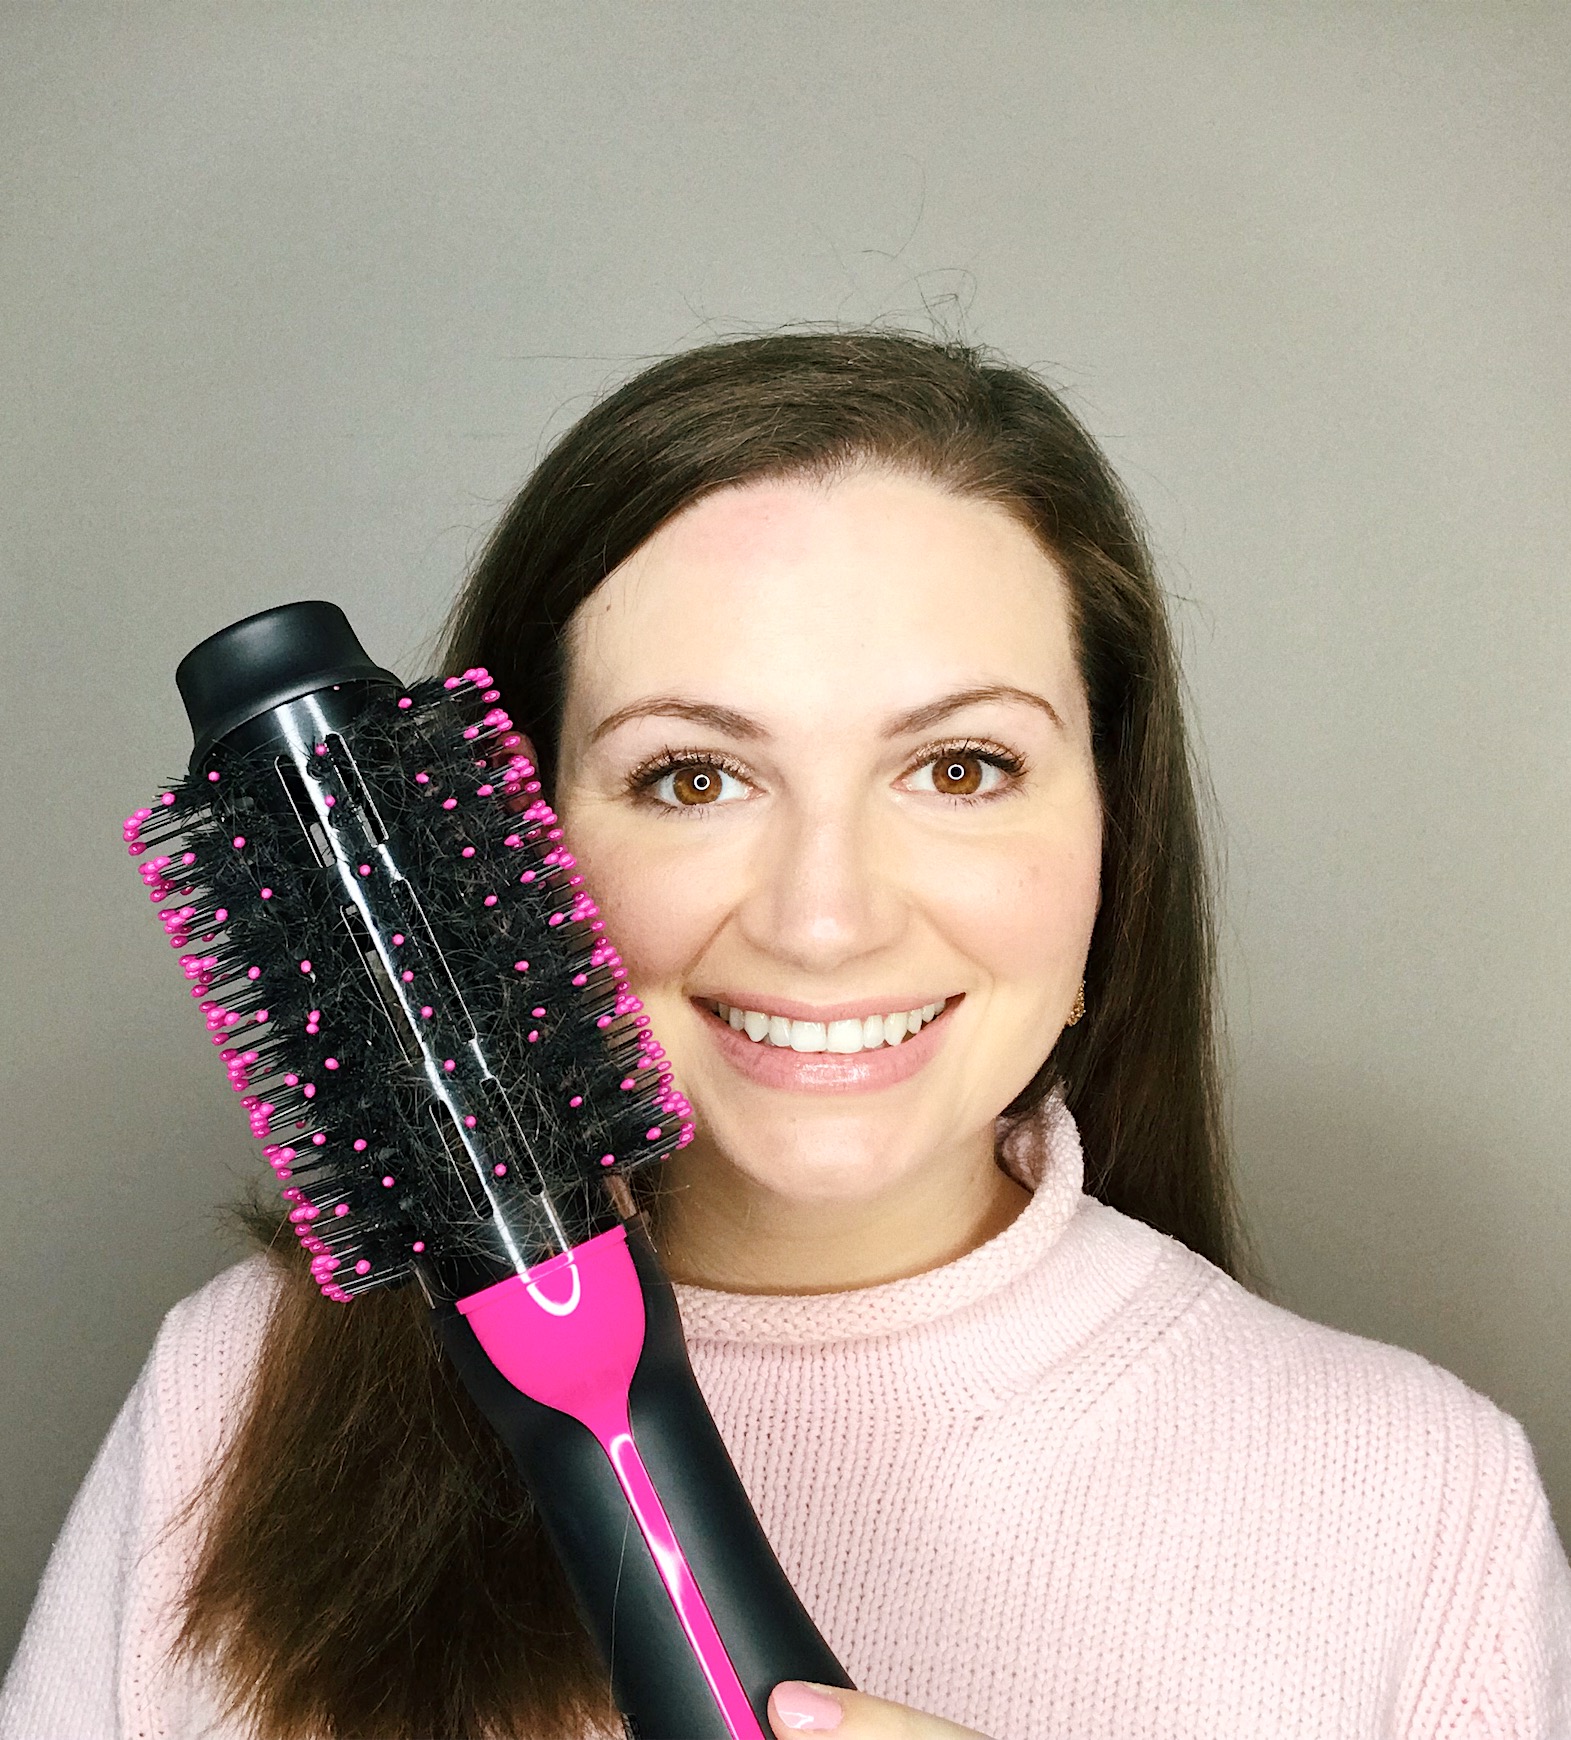 Review of the Revlon One-Step Volumizer Hair Dryer — All That Glitters